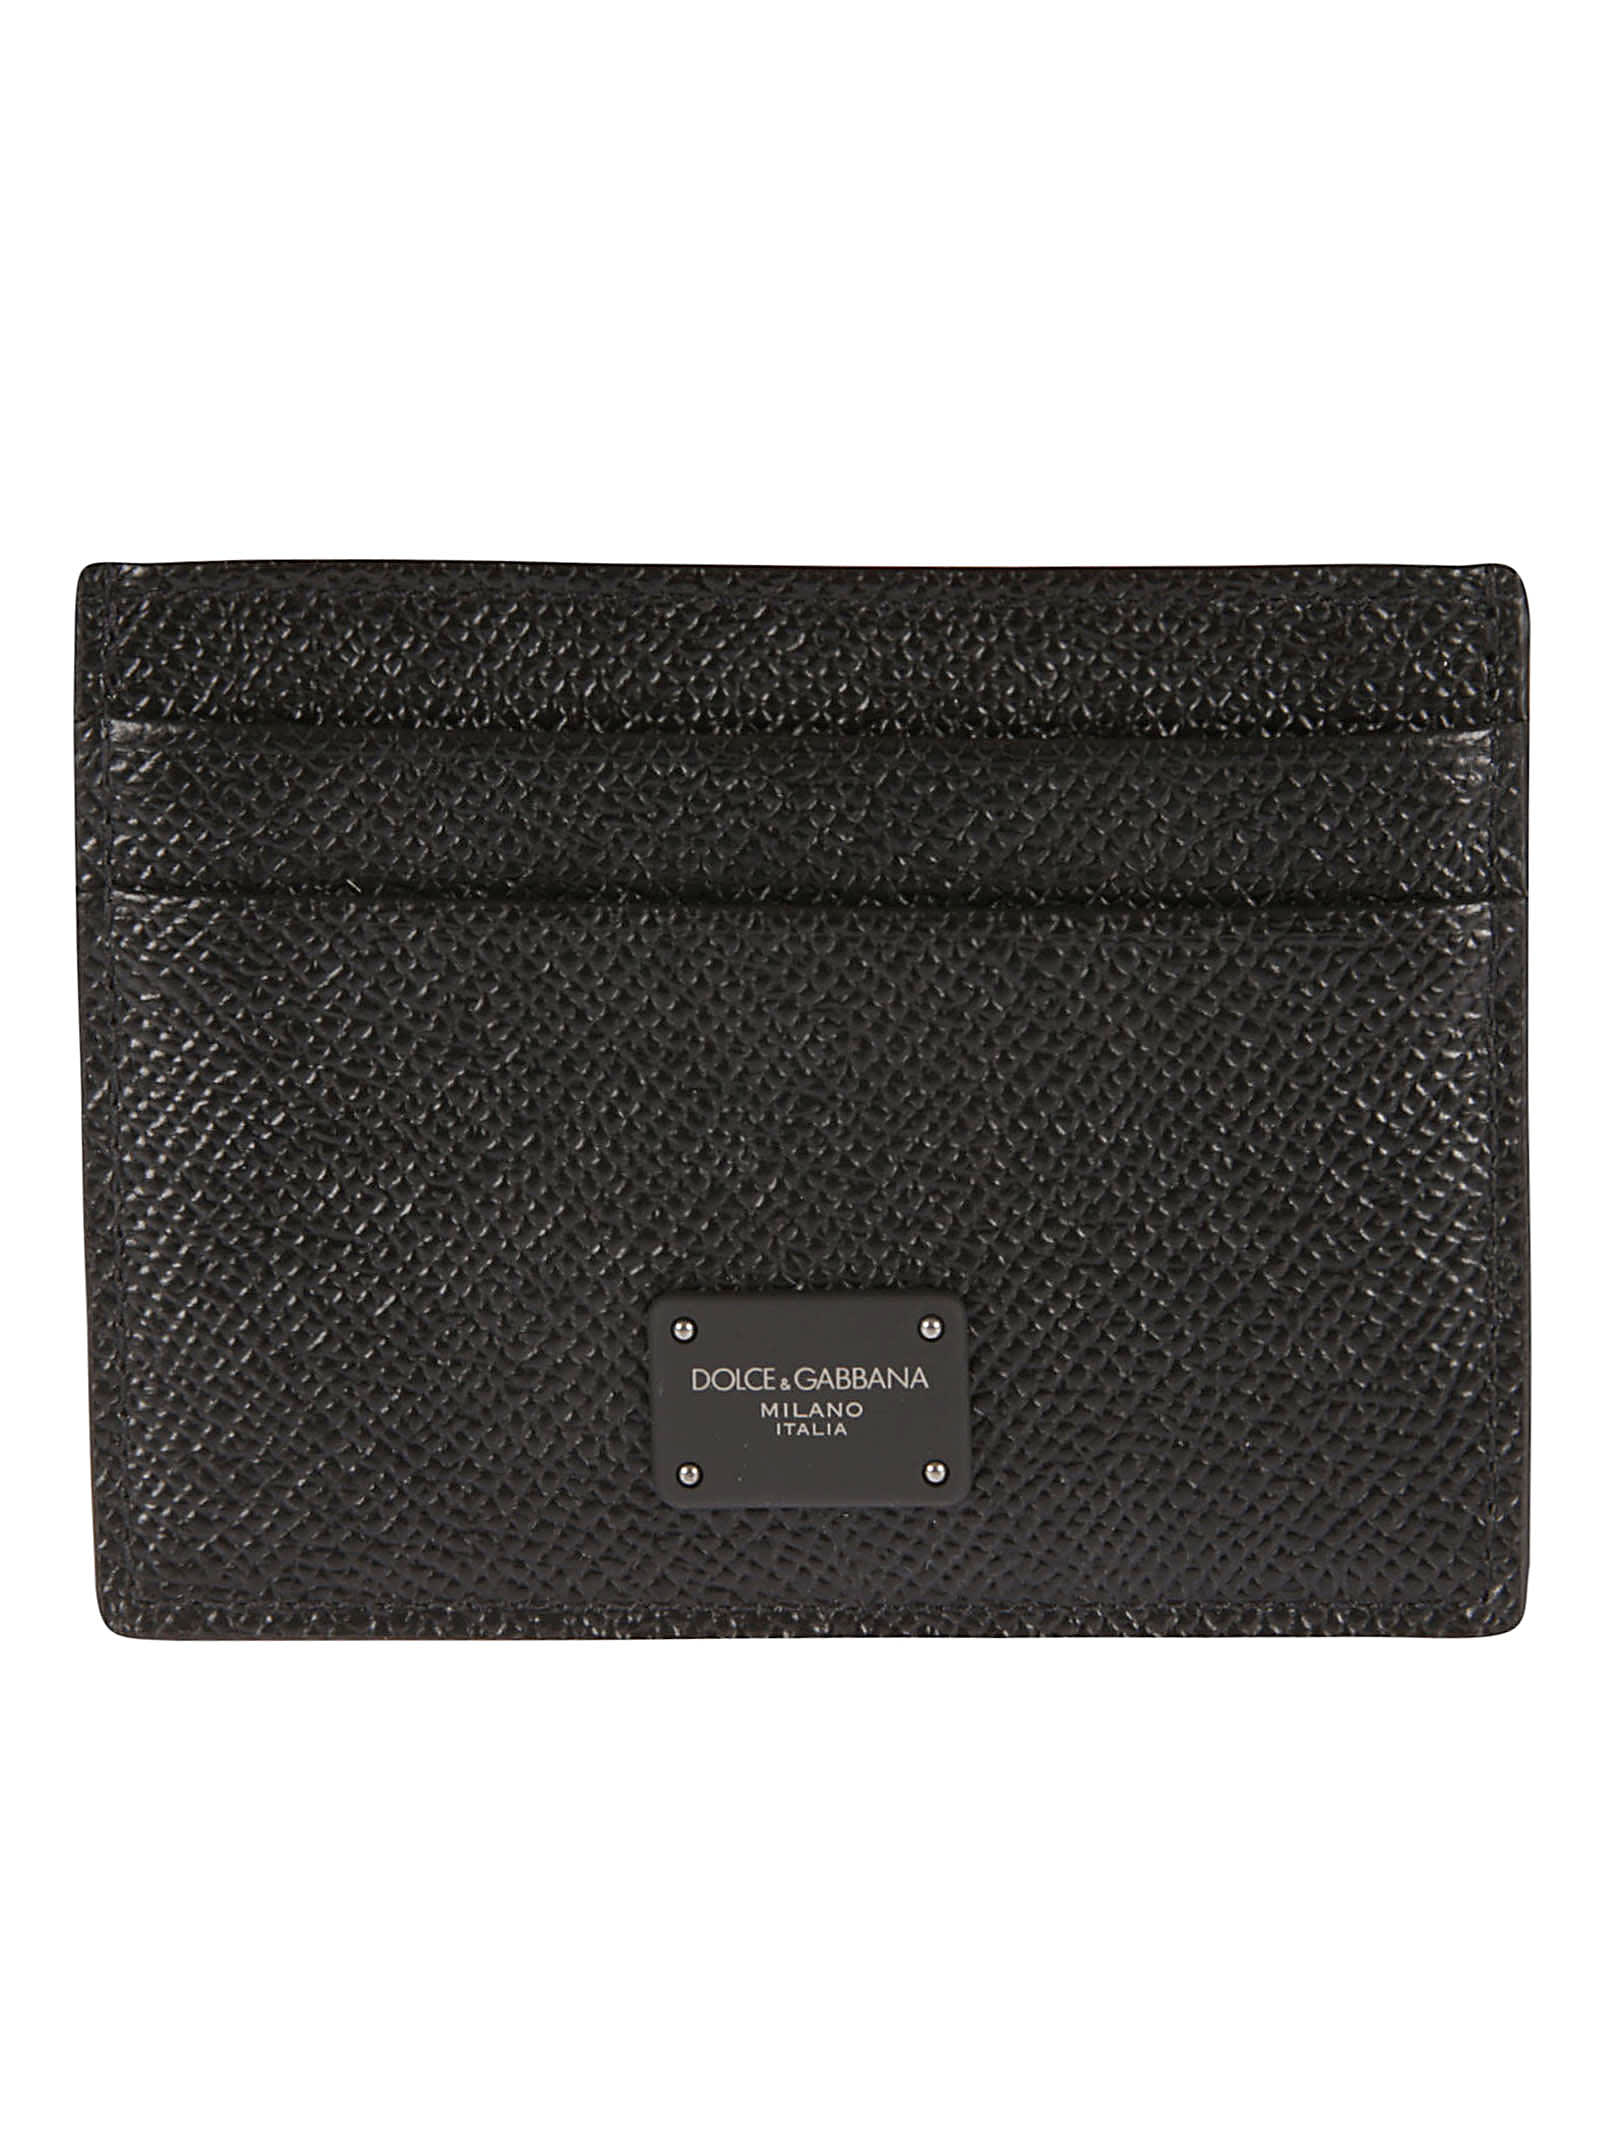 Dolce & Gabbana Grain Leather Logo Patched Card Holder In Black | ModeSens